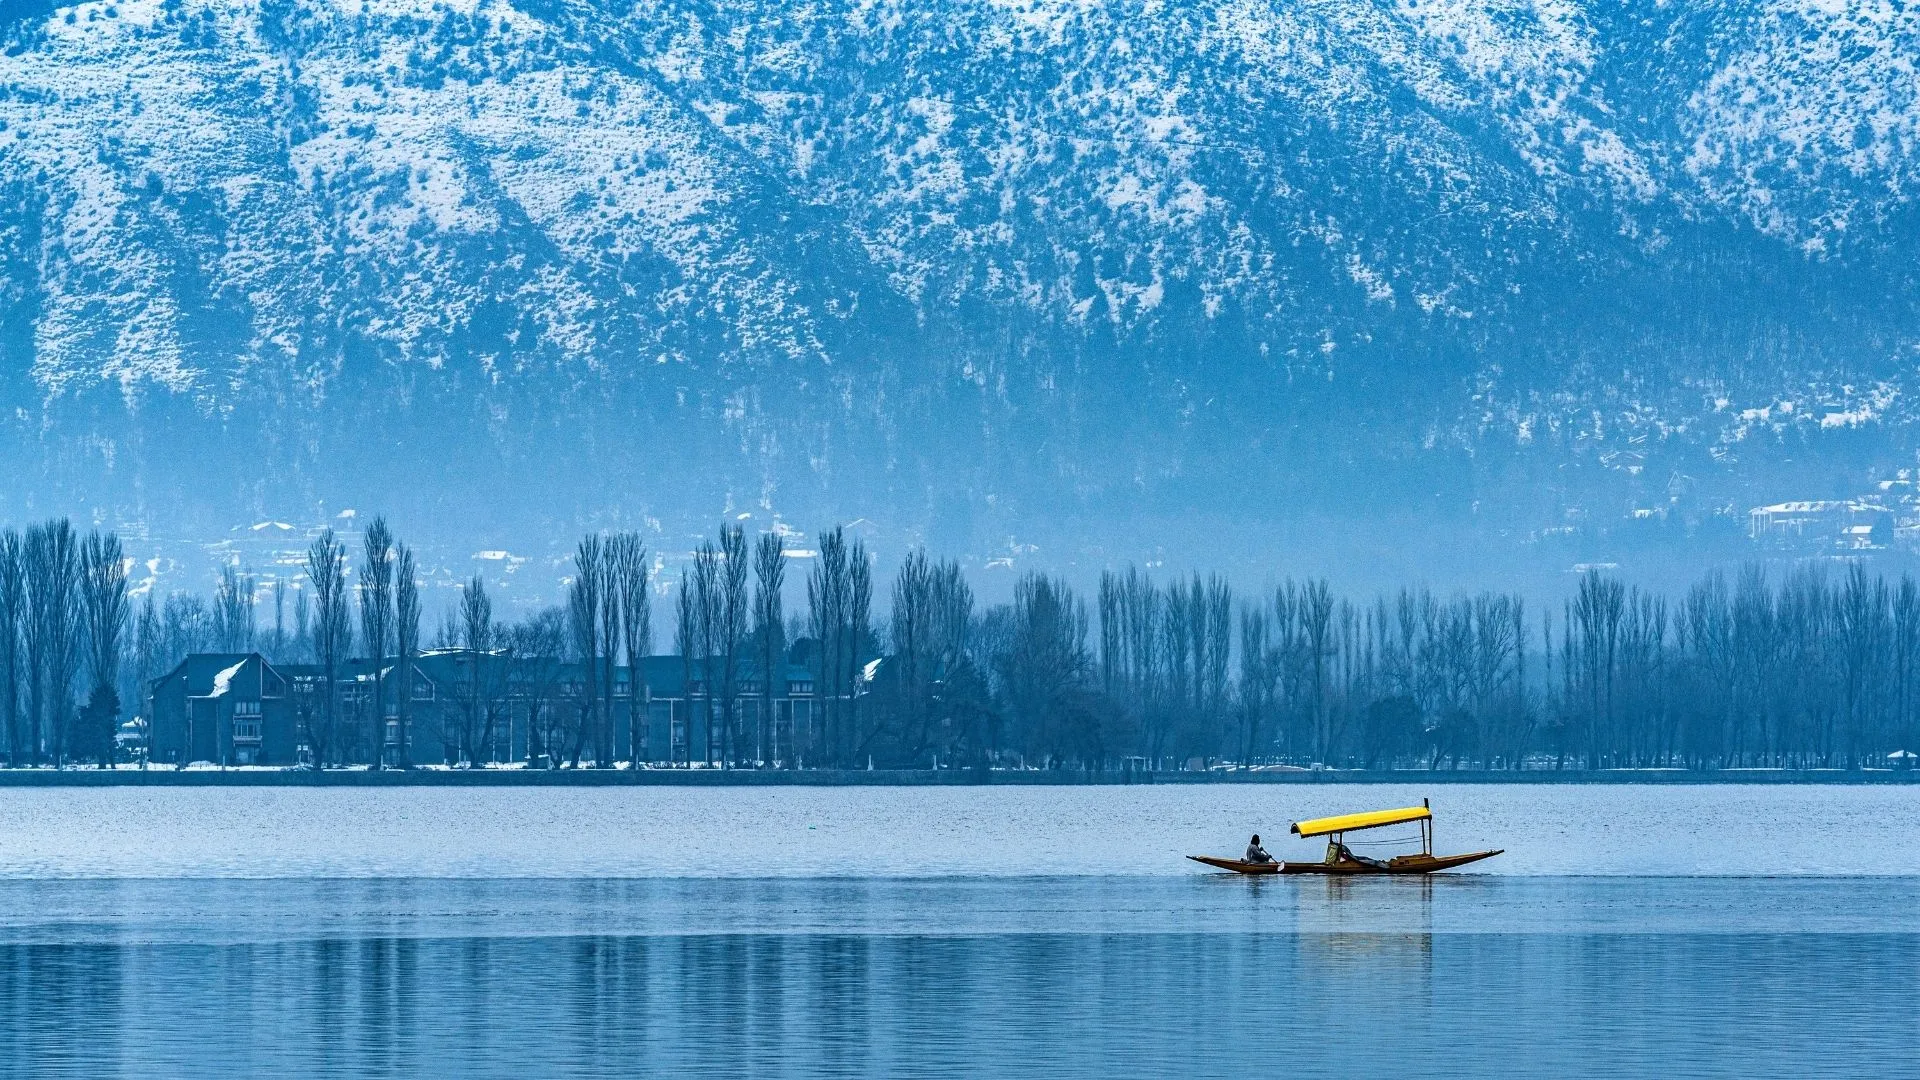 Heaven on Earth: 6 Best Places in the Paradise of Kashmir 